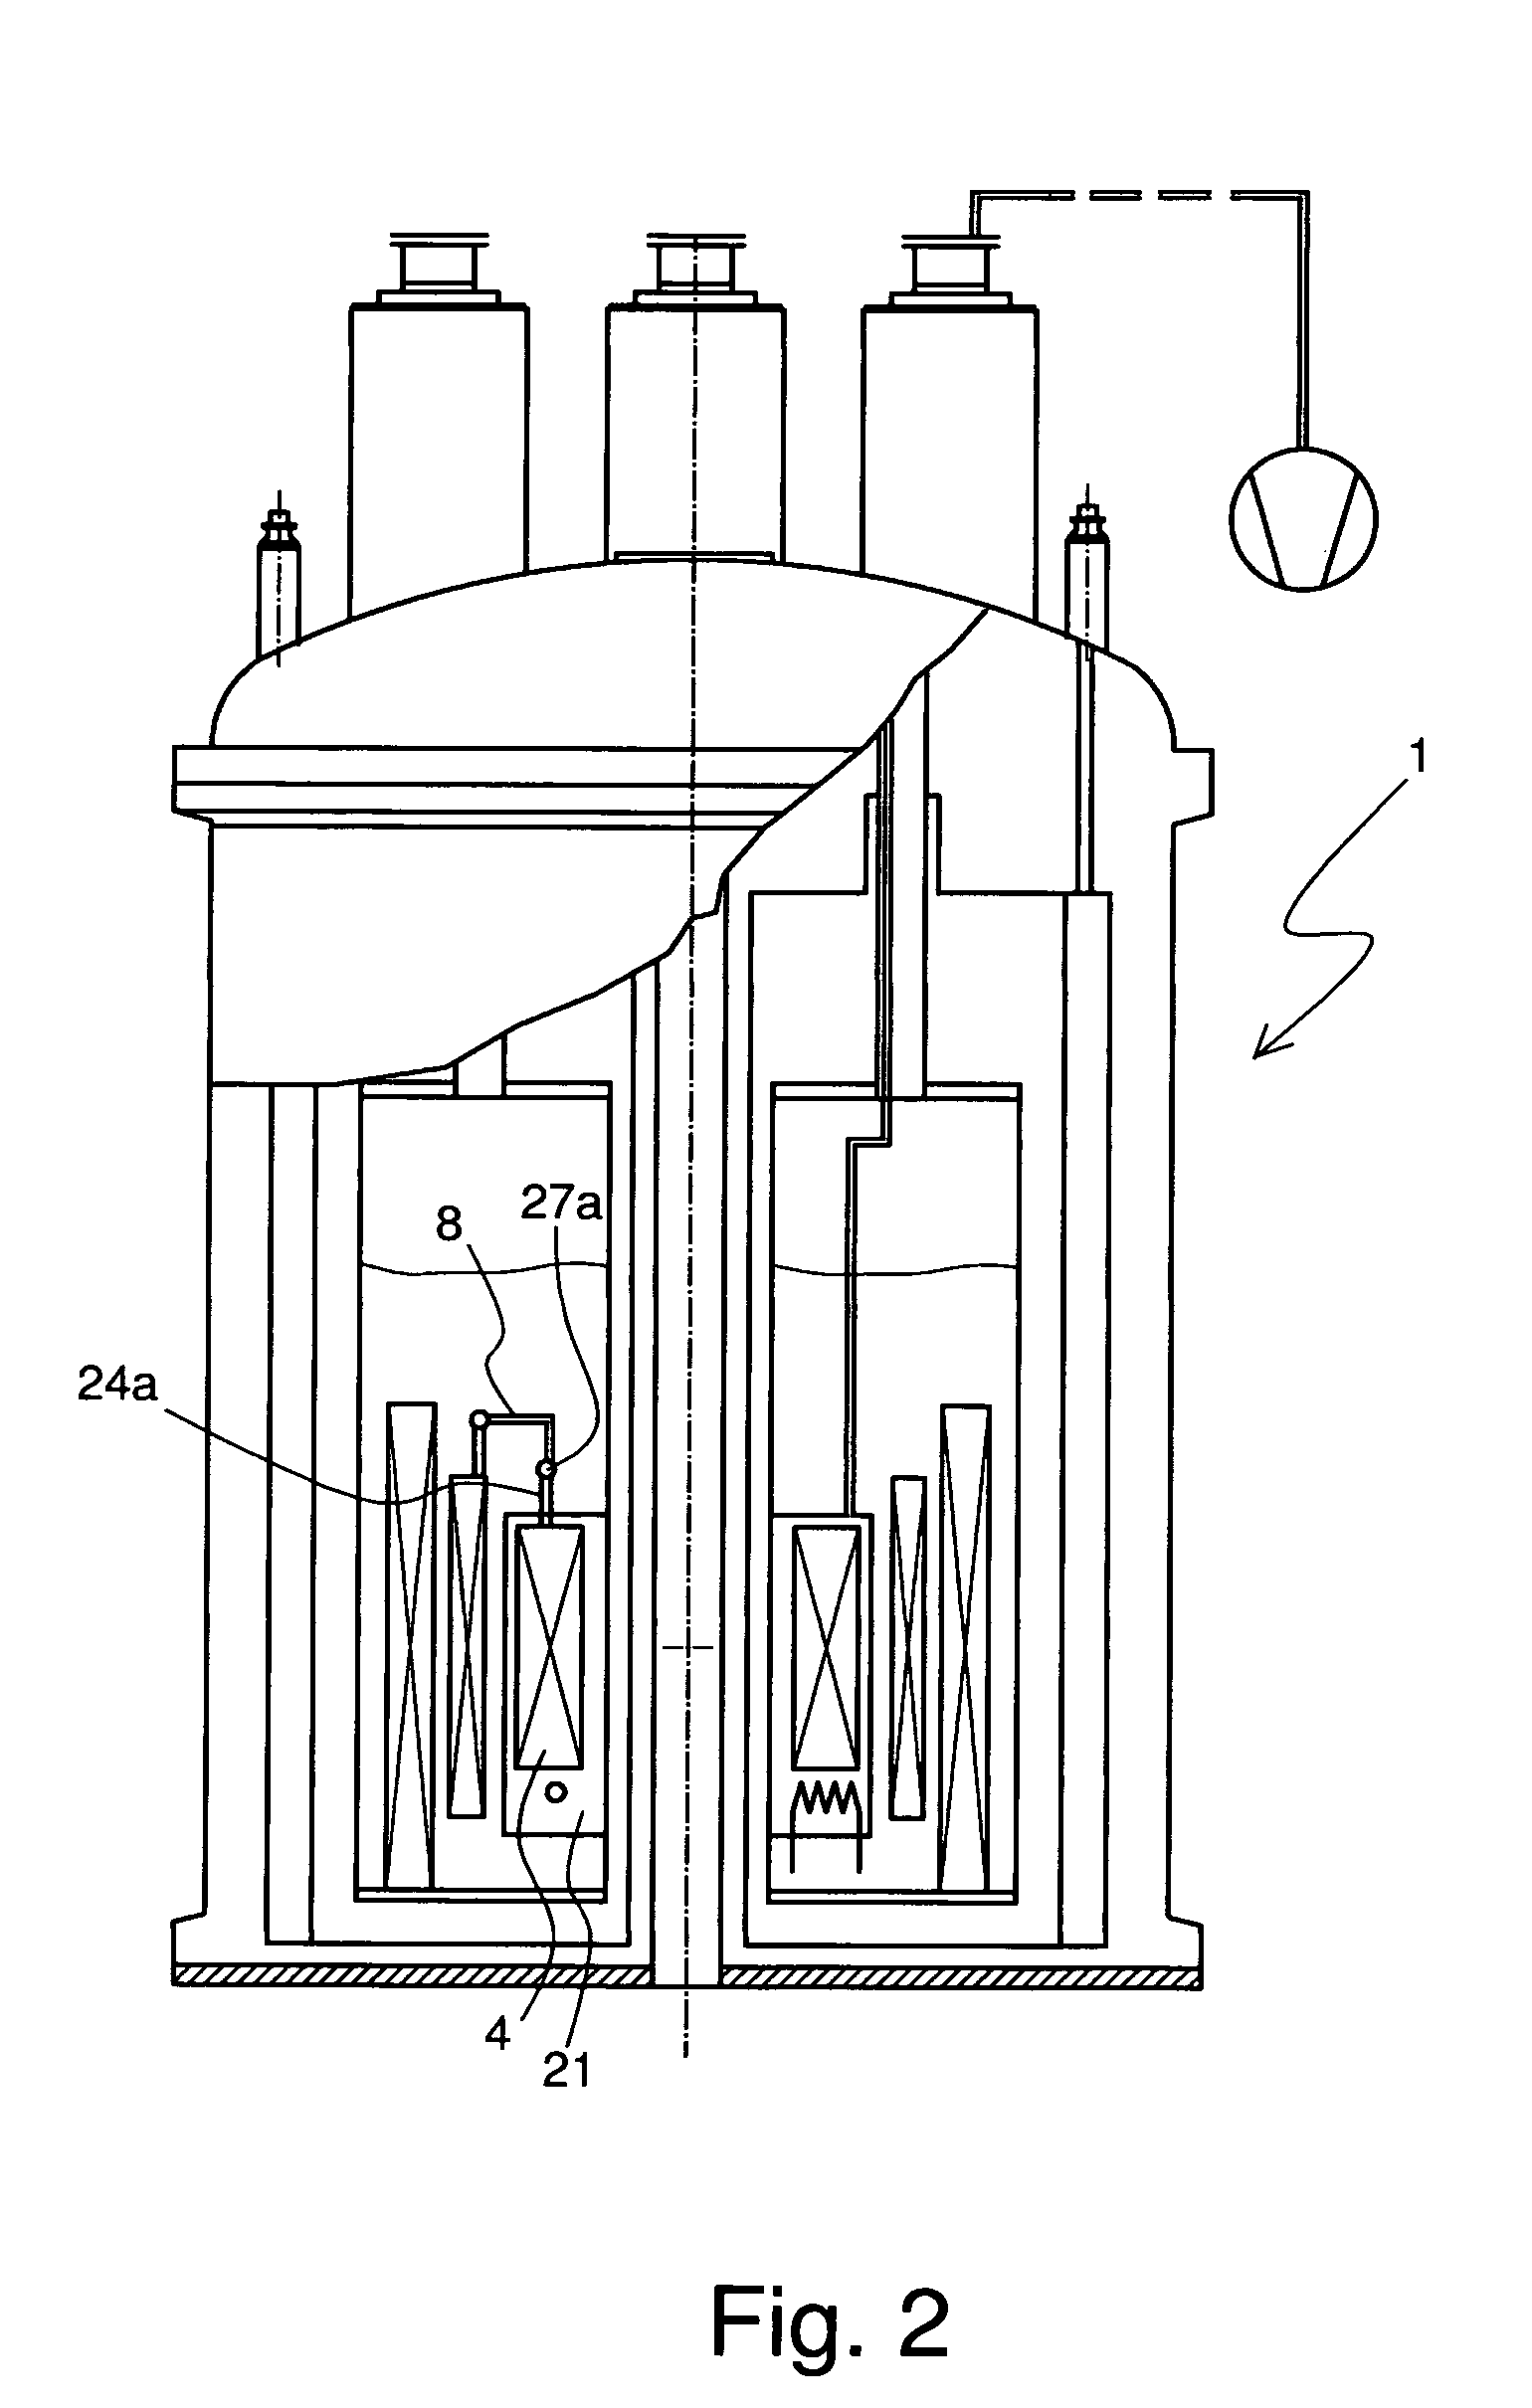 Cryostat having a magnet coil system, which comprises an LTS section and an encapsulated HTS section